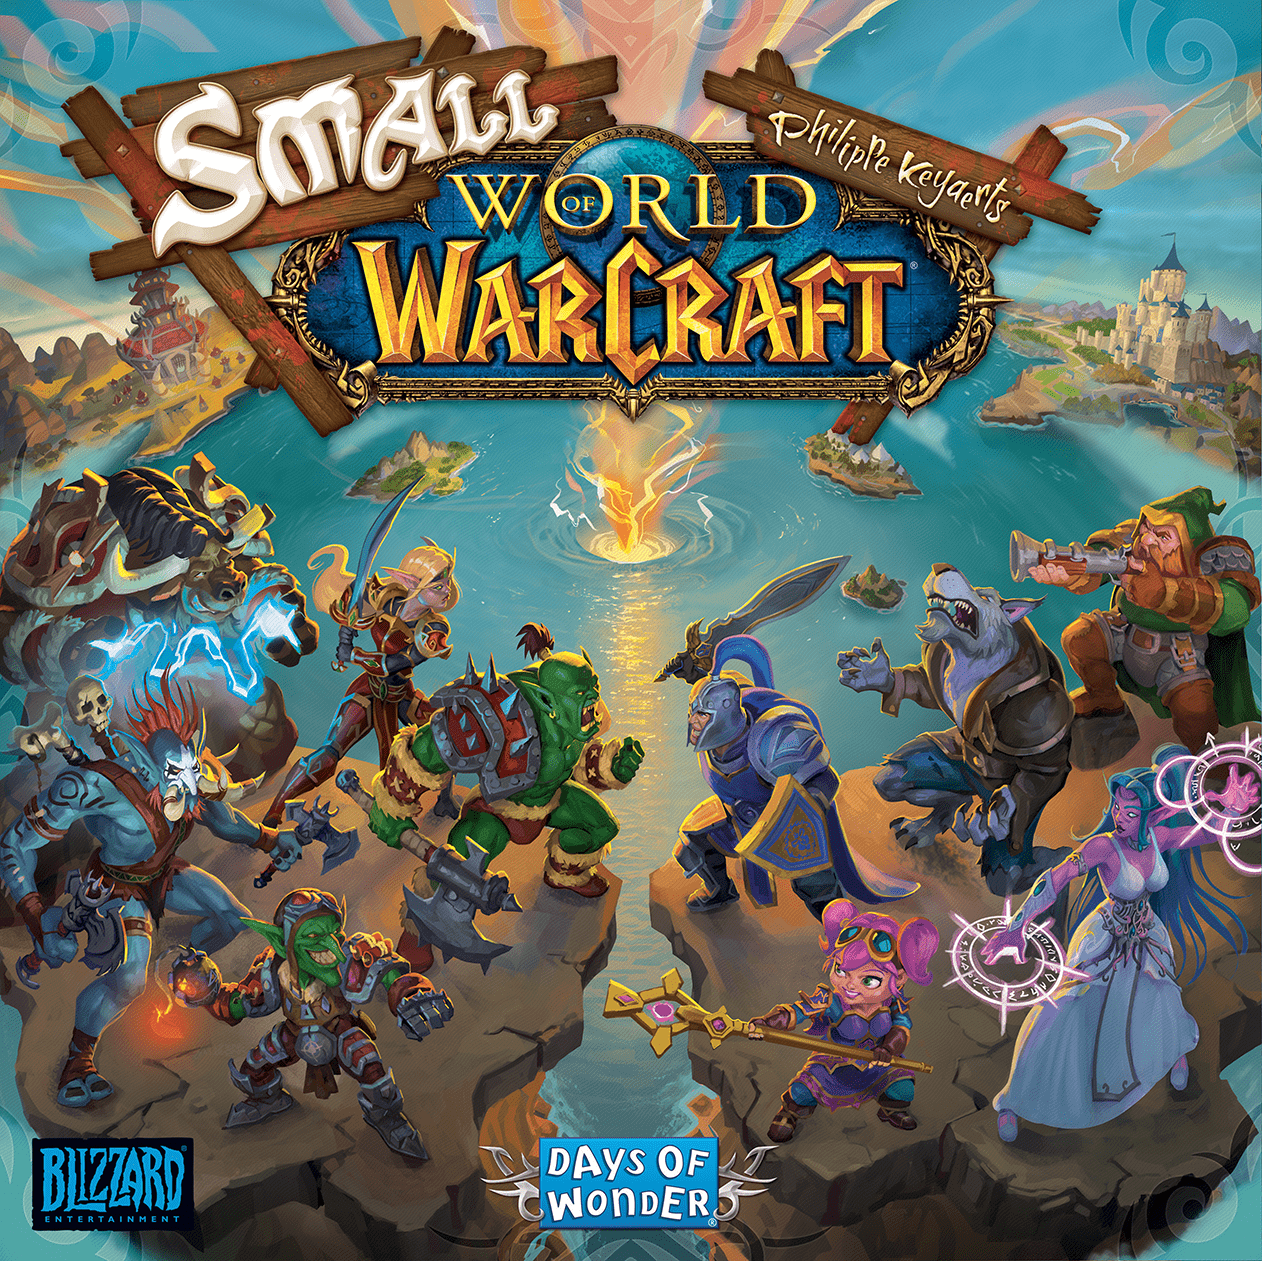 Read more about the article Small World of Warcraft